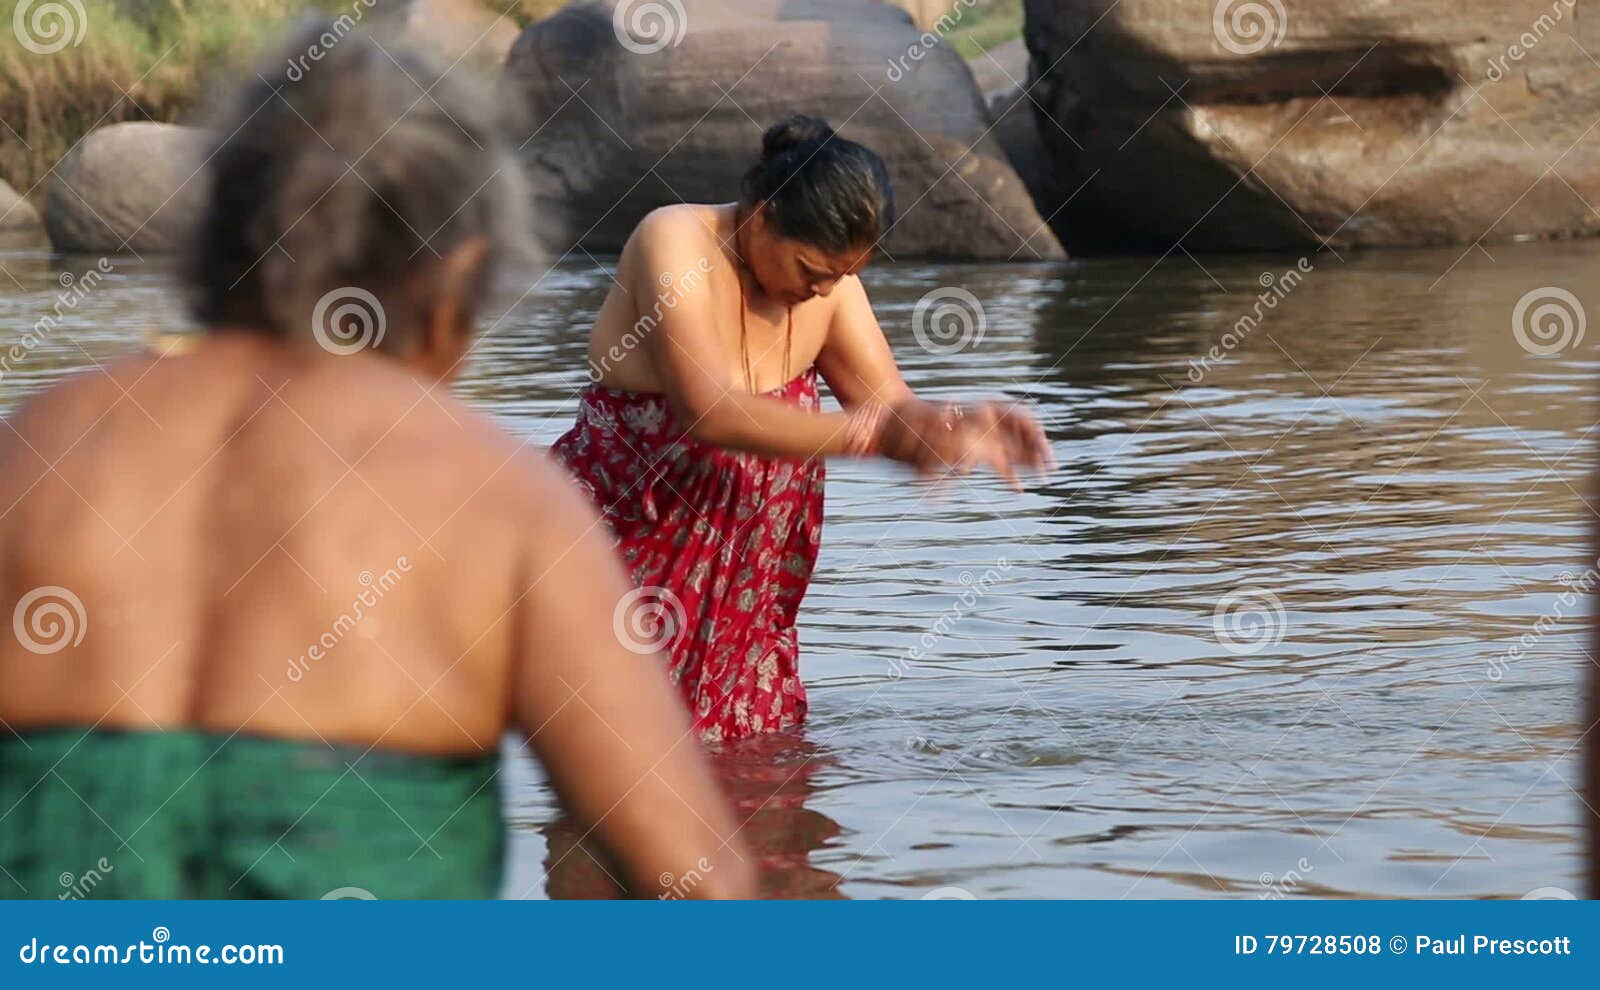 South indian bathing video